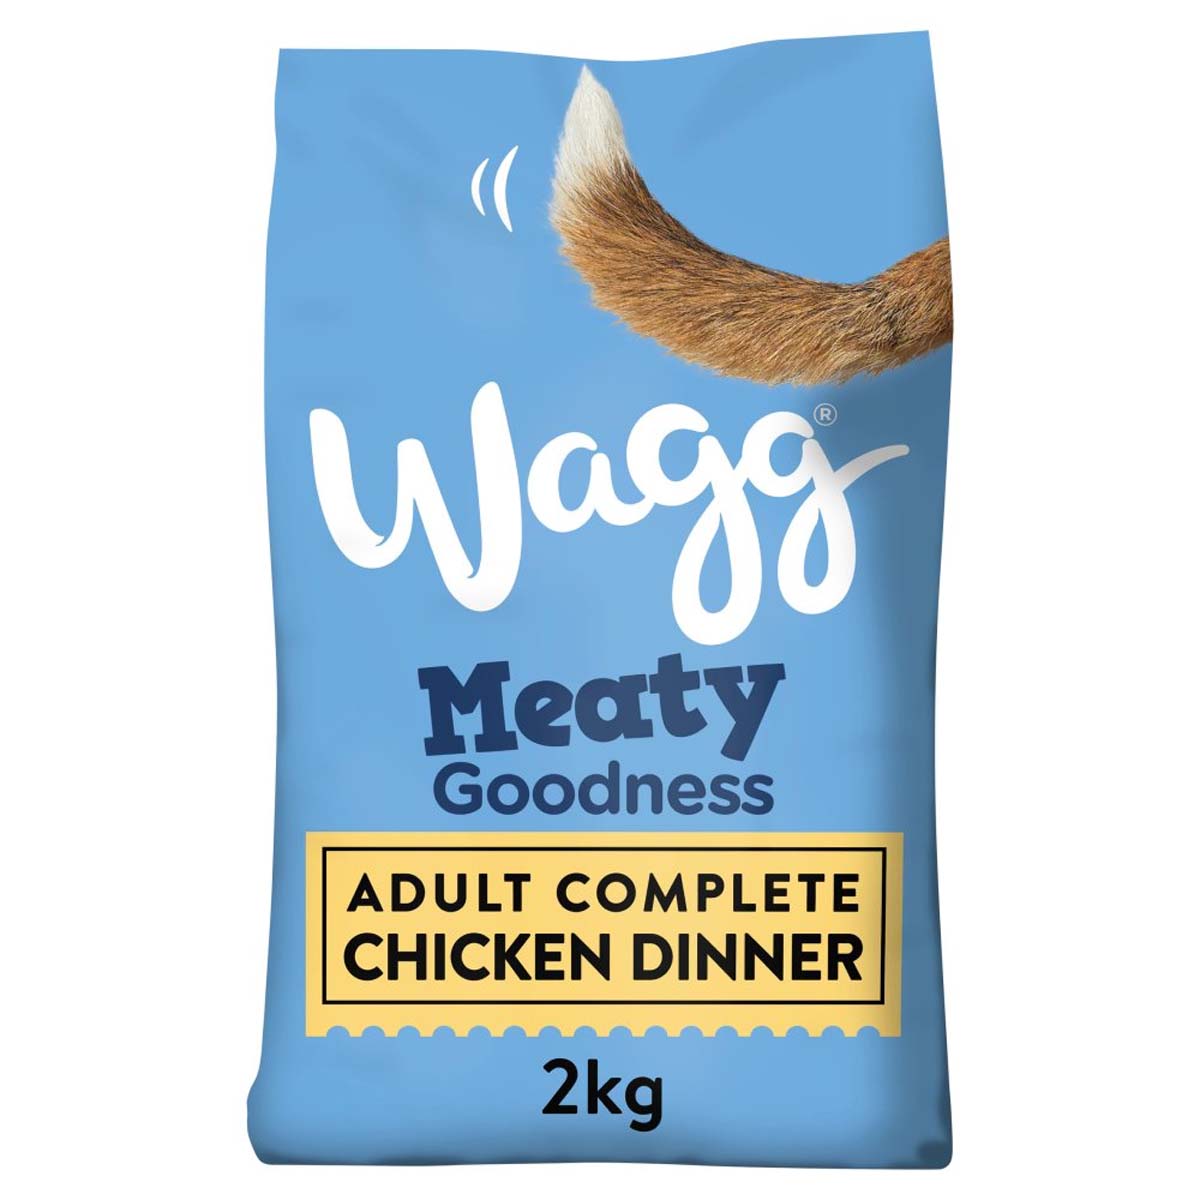 Wagg - Meaty Goodness Adult Complete Chicken Dinner Dry Dog Food - 2kg - Continental Food Store